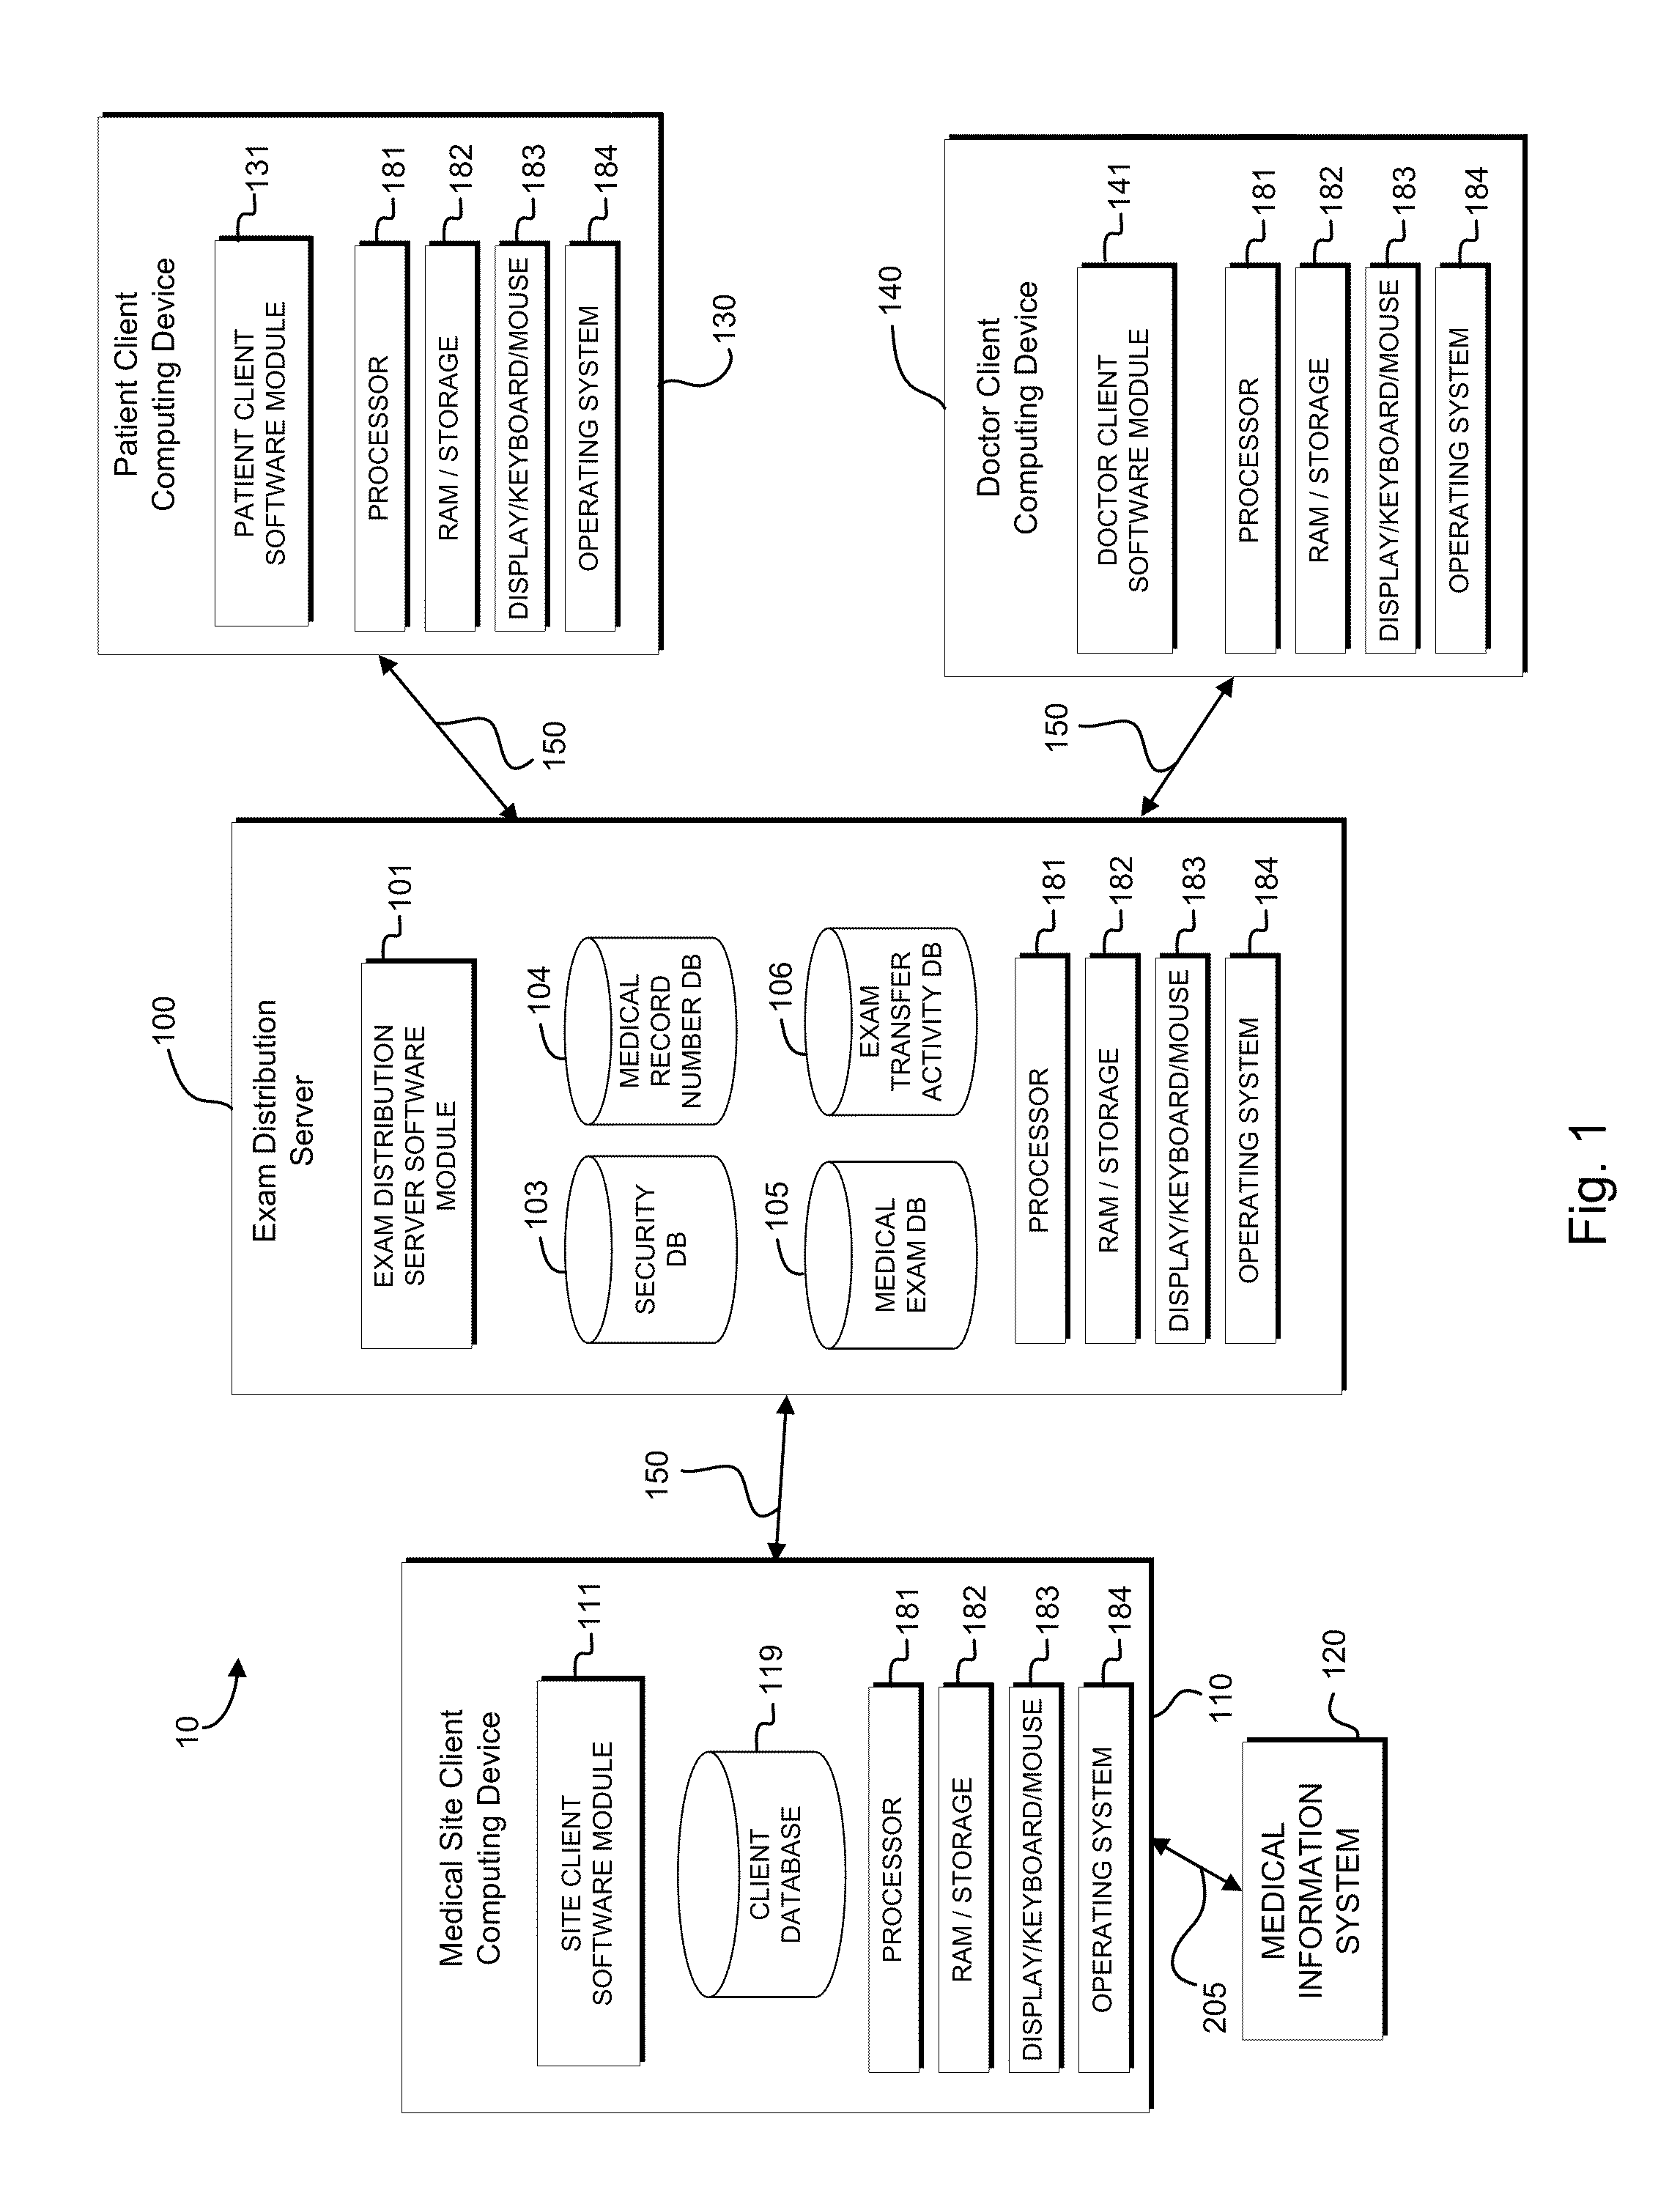 System and method for communication of medical information